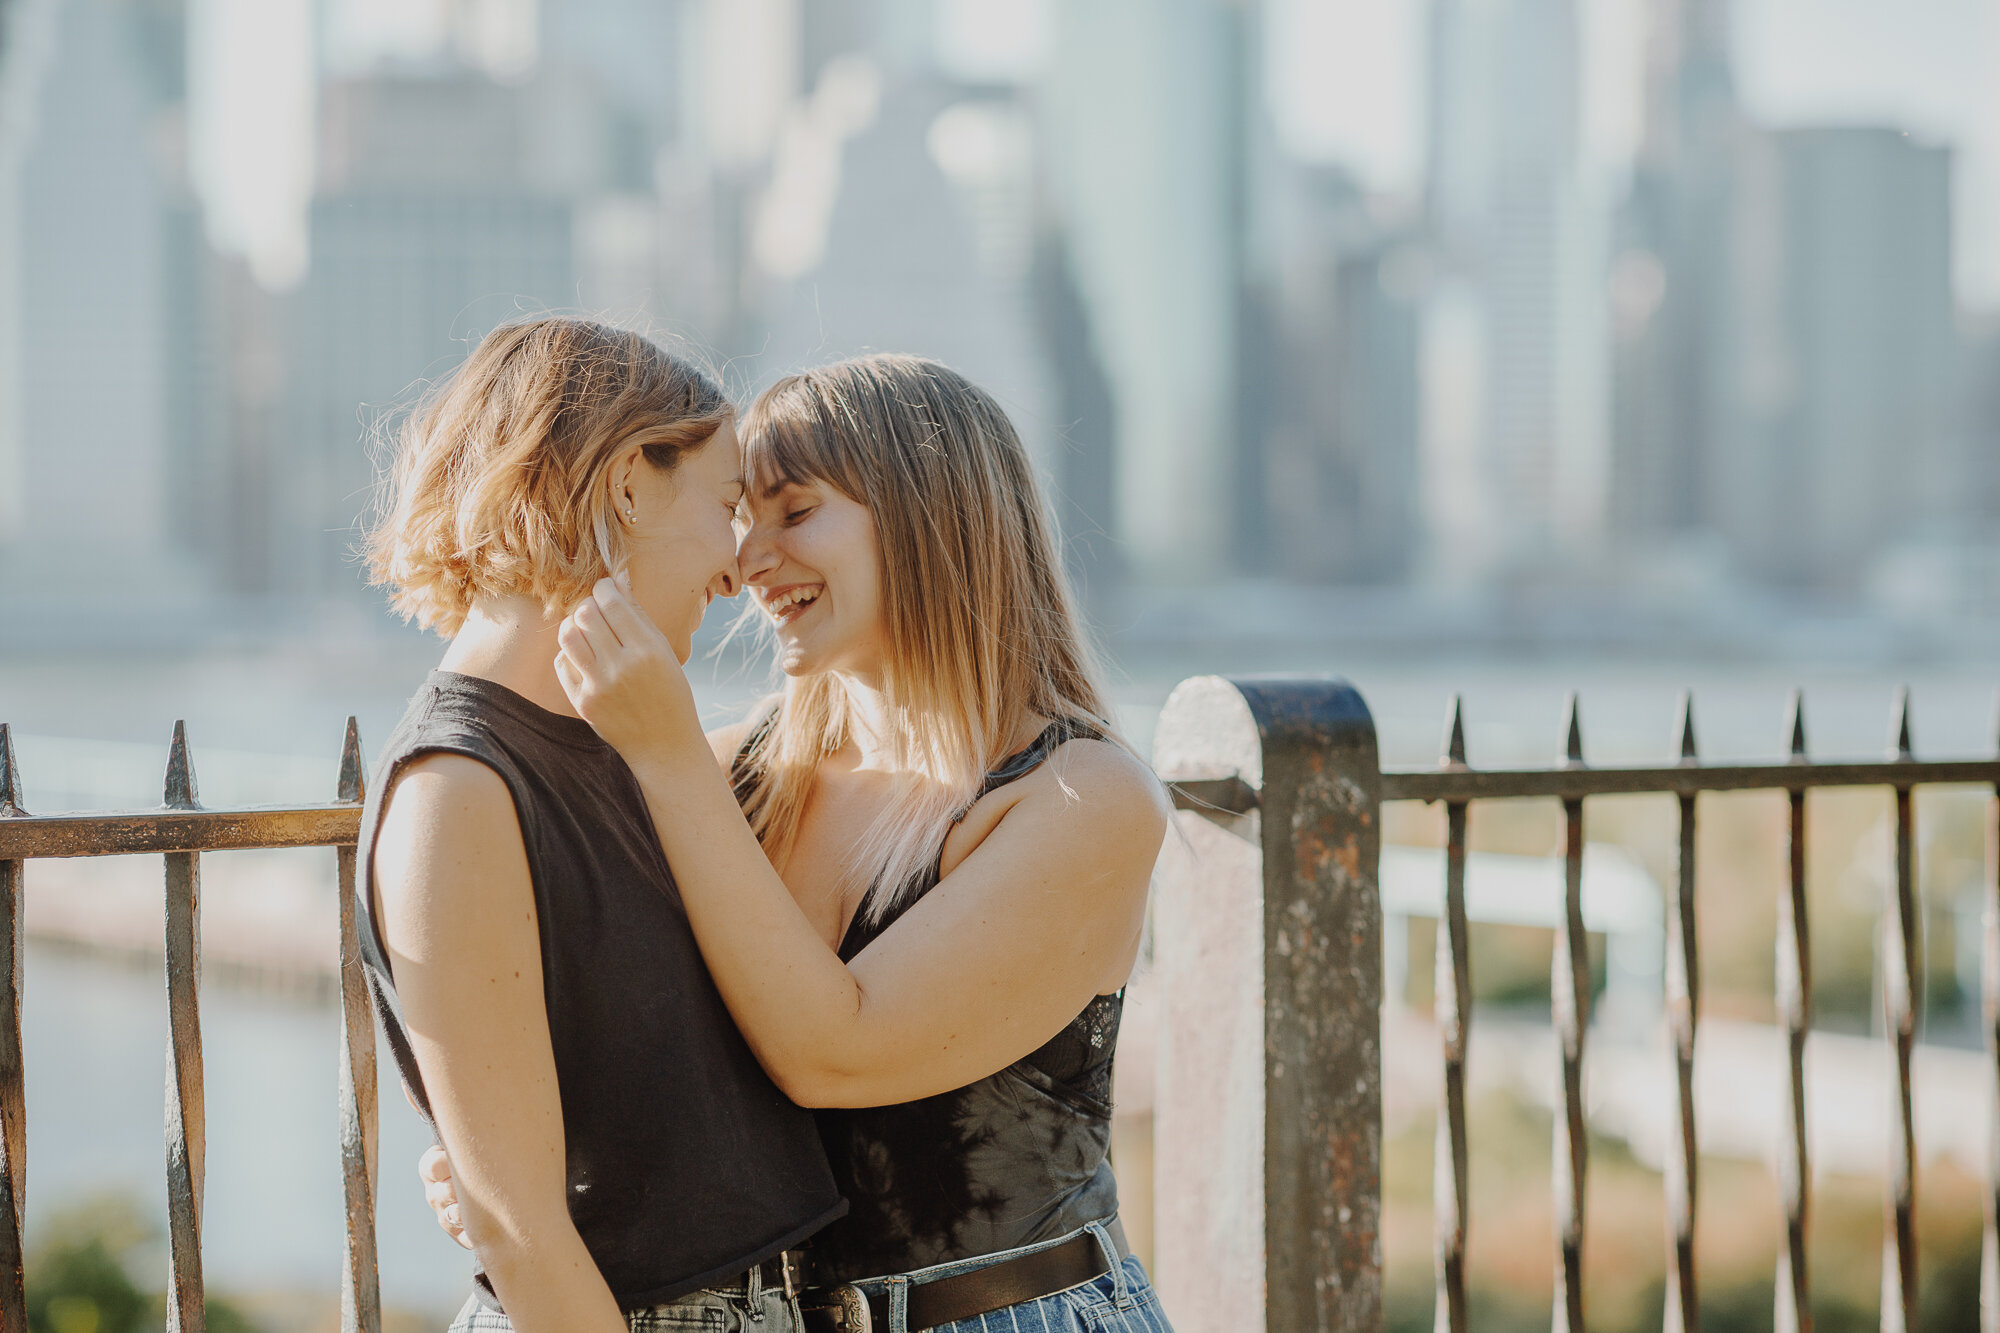 Playful Brooklyn Heights Couples Photo Session